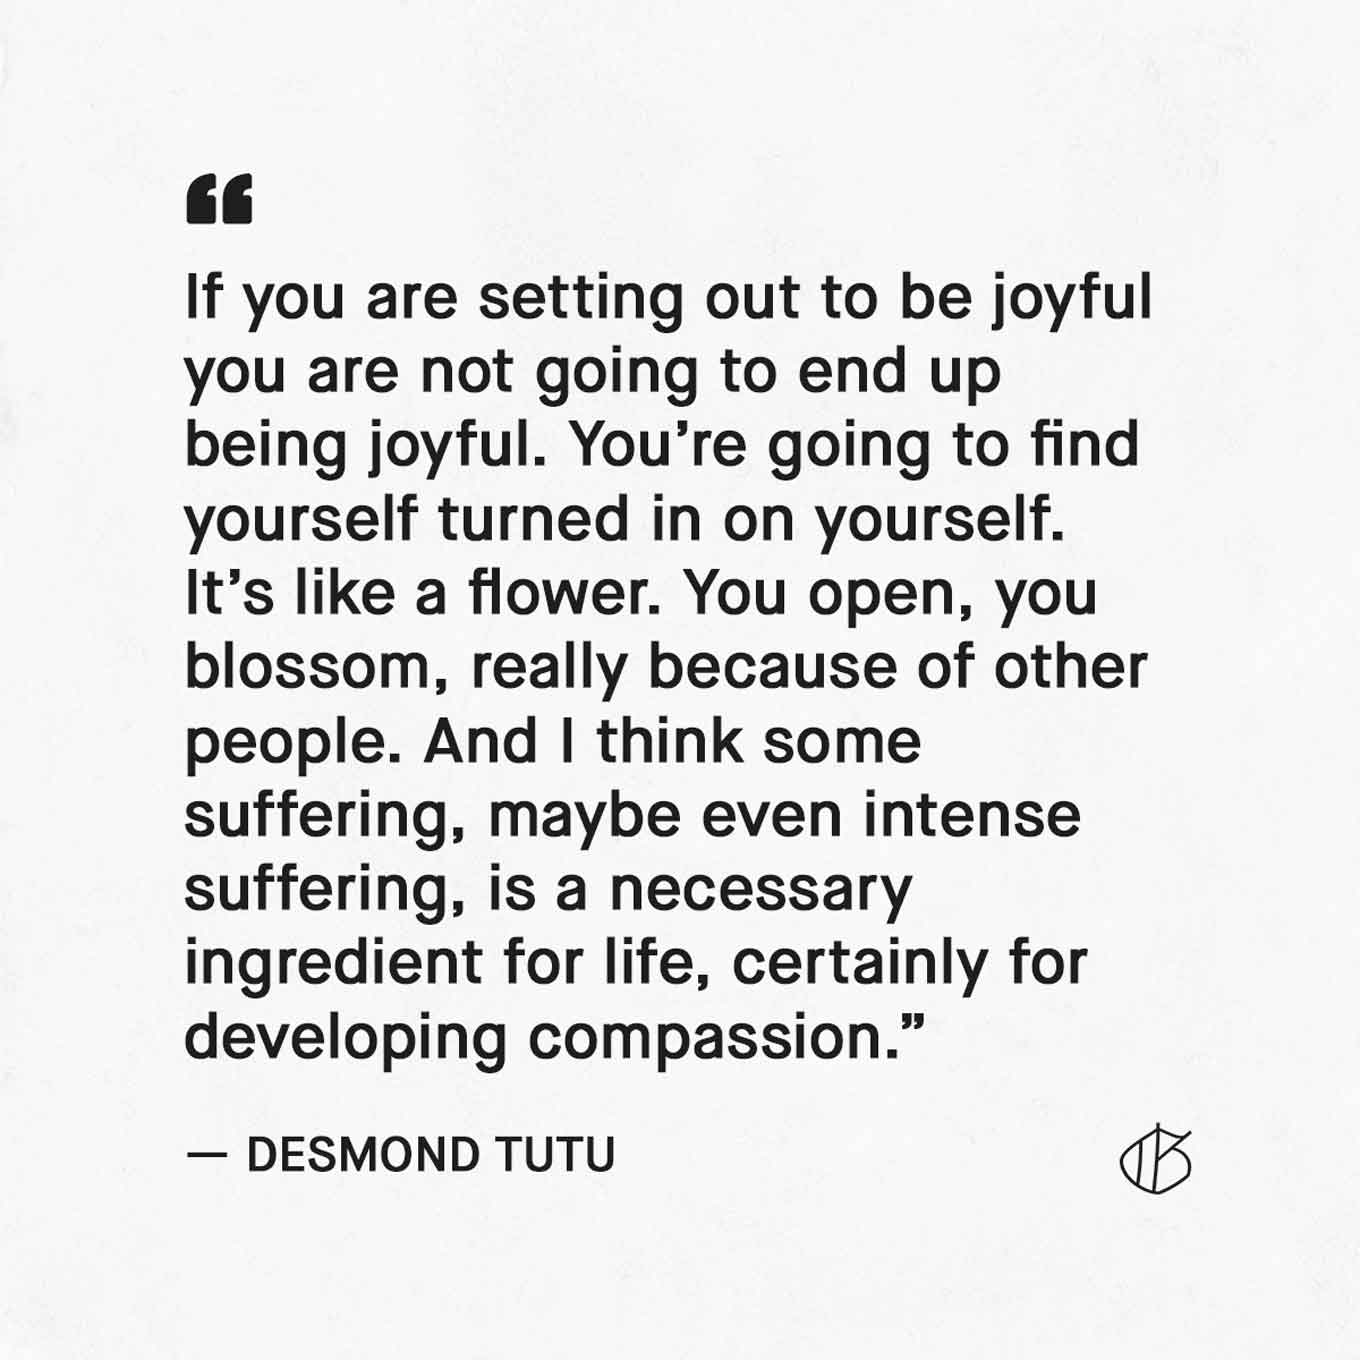 Desmond Tutu Quote: “If you are setting out to be joyful you are not going to end up being joyful. You’re going to find yourself turned in on yourself. It’s like a flower. You open, you blossom, really because of other people. And I think some suffering, maybe even intense suffering, is a necessary ingredient for life, certainly for developing compassion.” — Archbishop Desmond Tutu